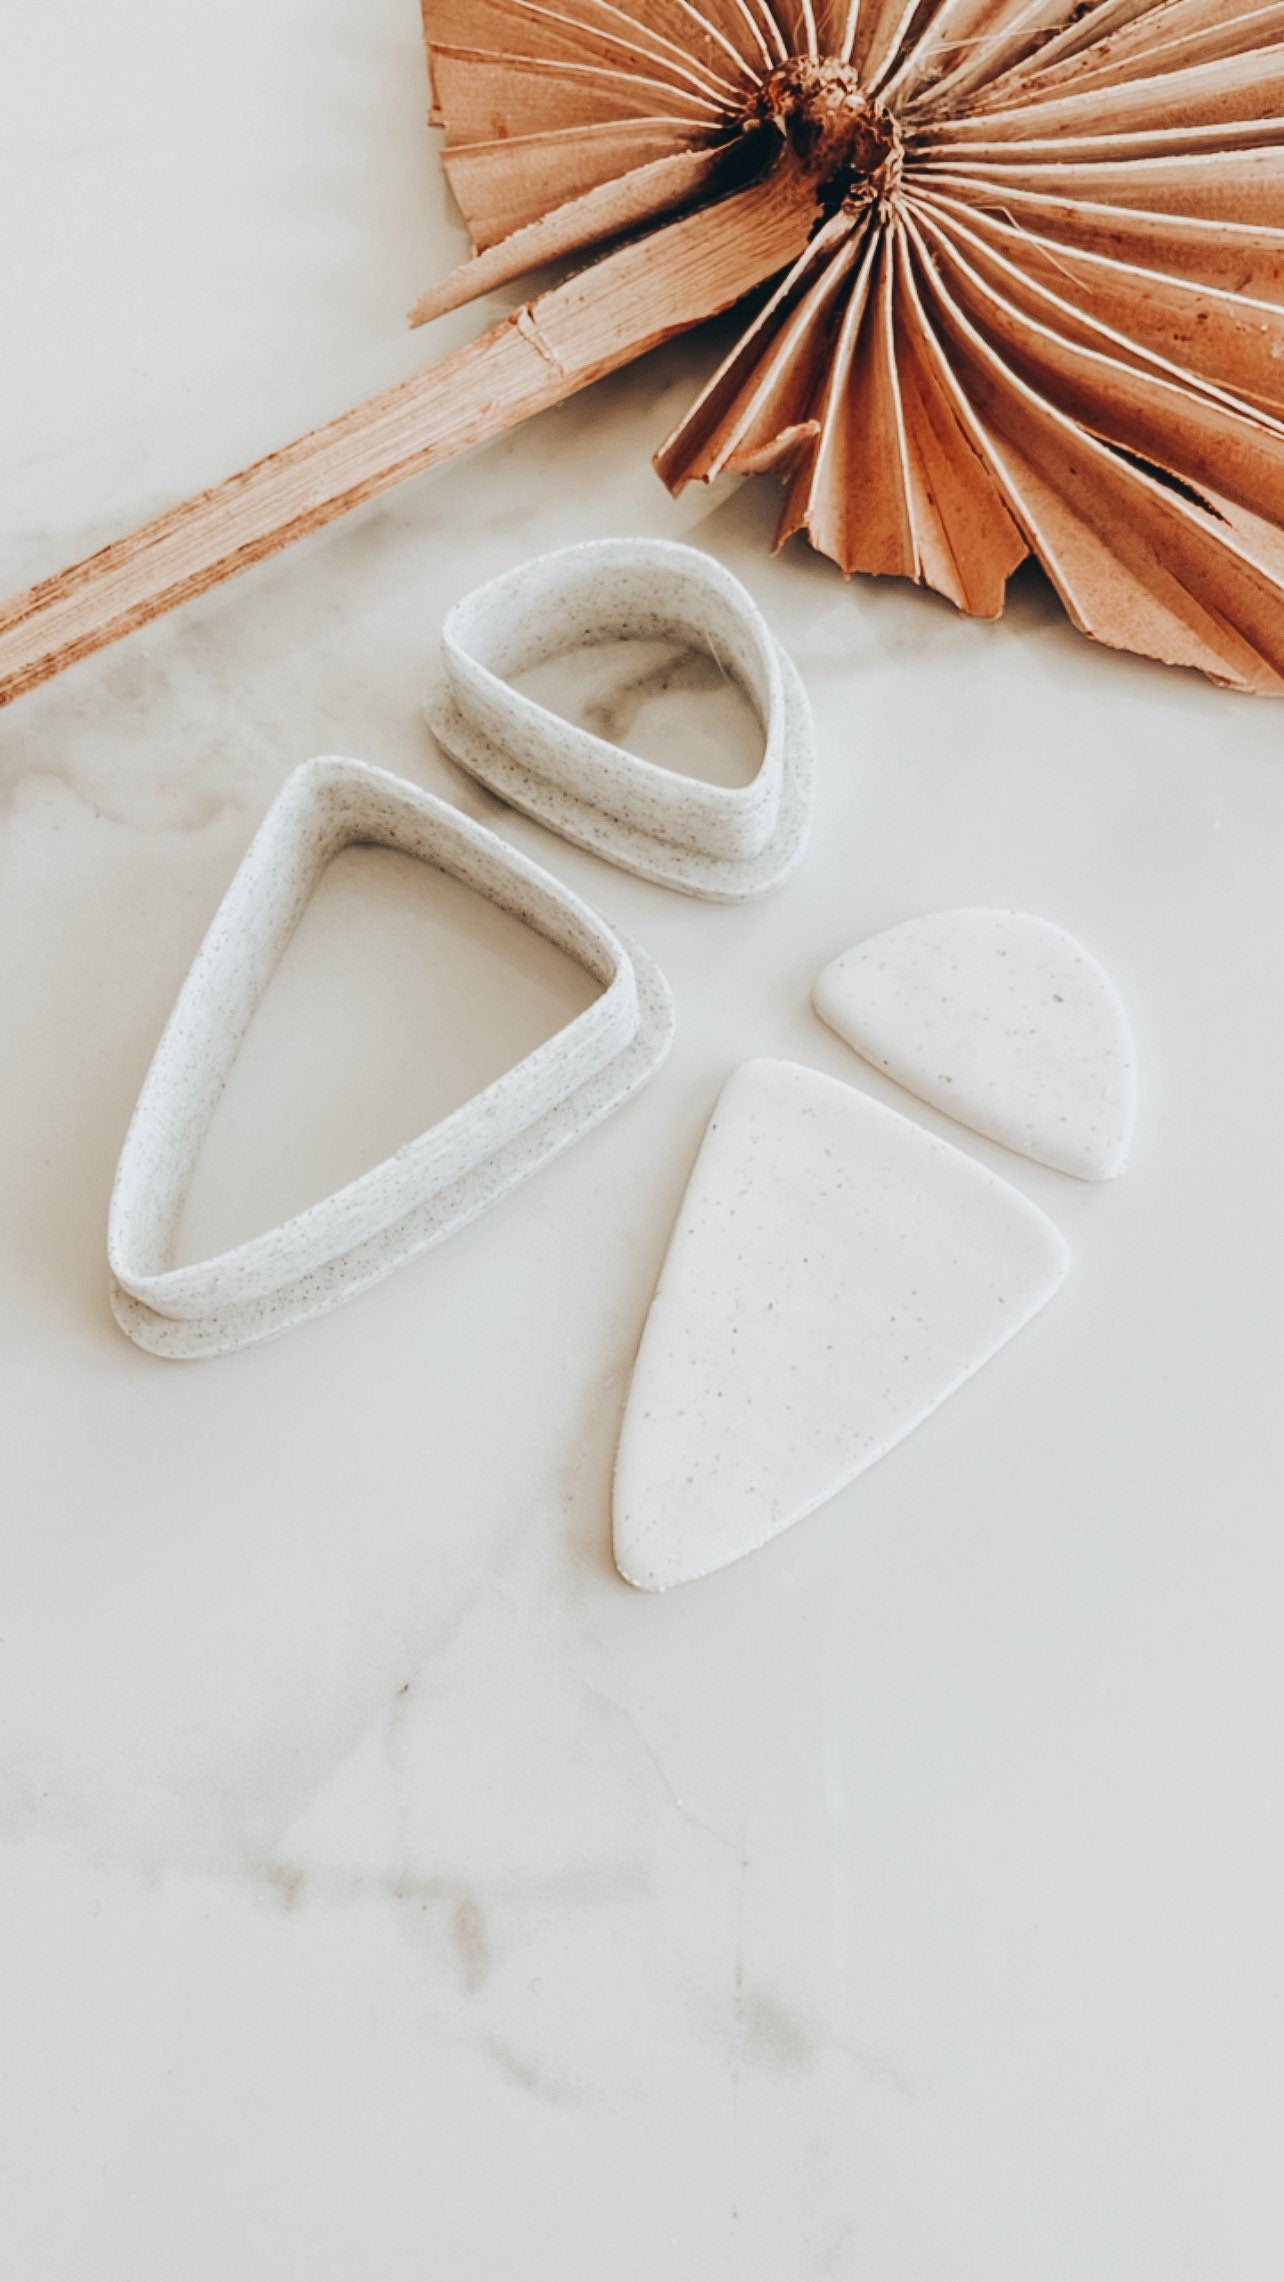 Large 2 Piece Organic Clay Cutter Set | 2.25 Inches